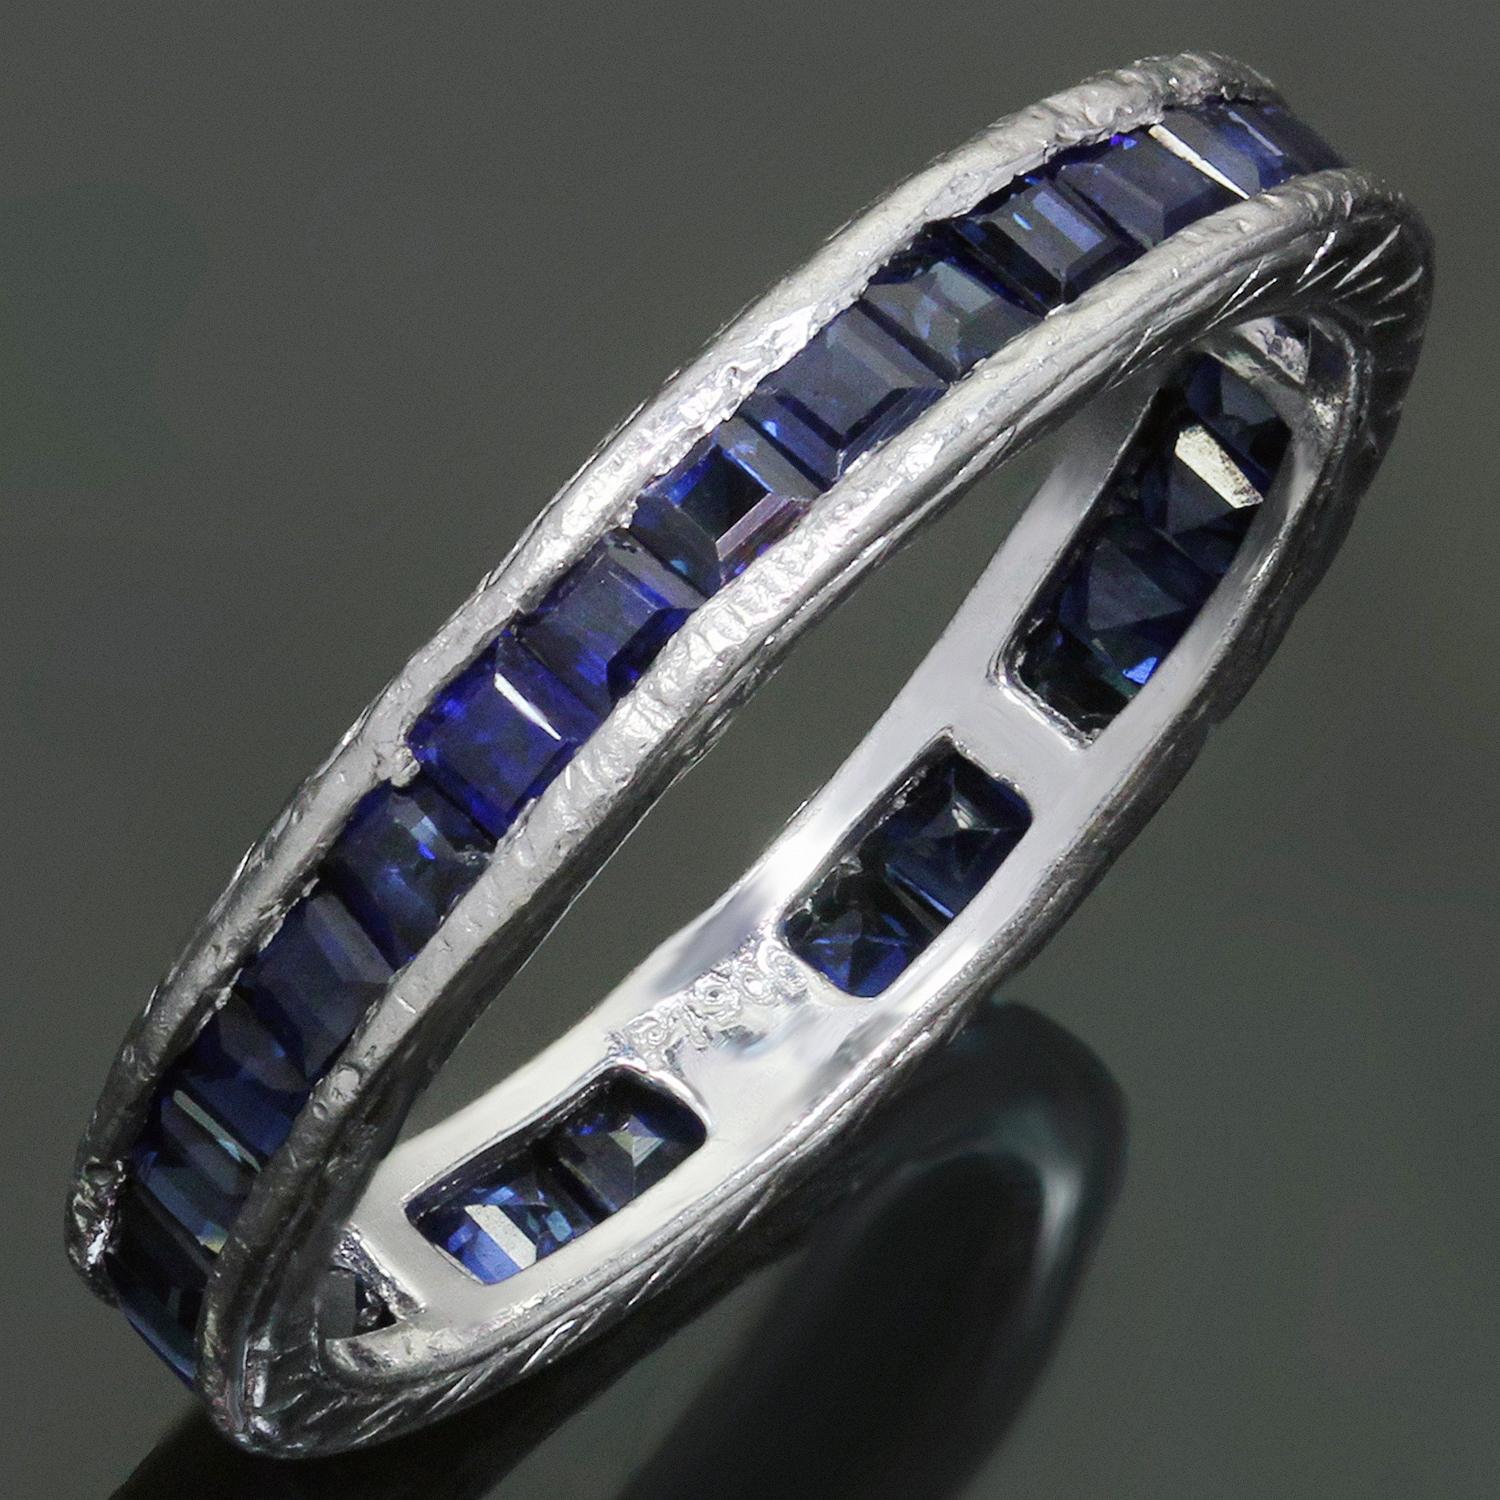 This classic antique eternity band is hand-engraved in platinum and set with square-cut blue sapphires. Made in United States circa 1930s. Measurements: 0.11